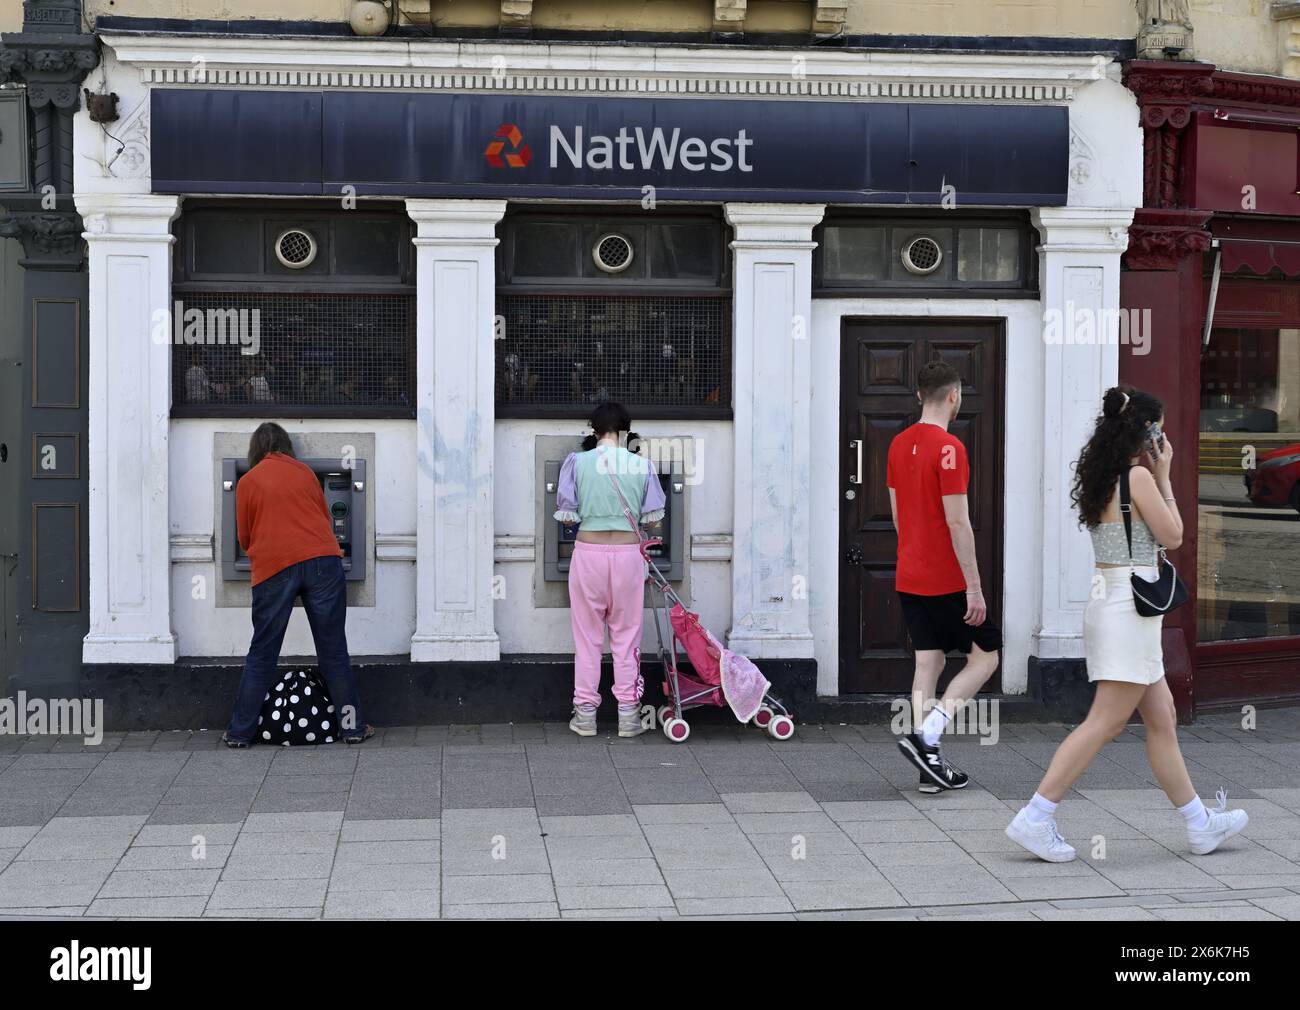 NatWest bank with people at cash machines embedded in front wall Stock Photo